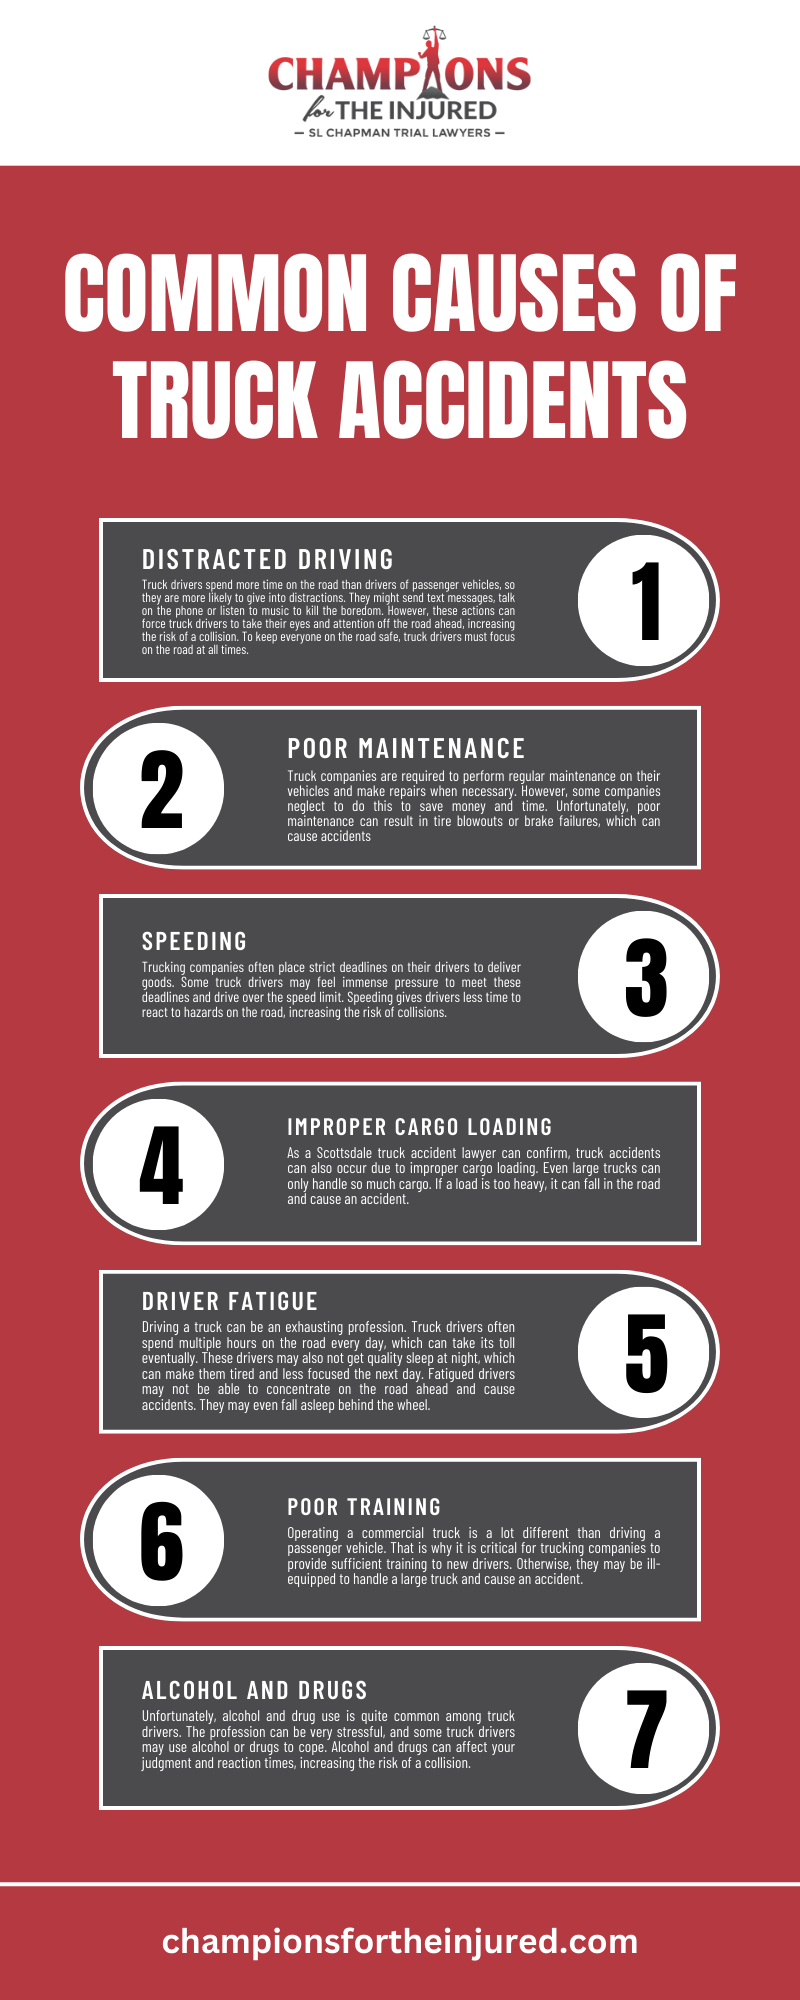 COMMON CAUSES OF TRUCK ACCIDENTS INFOGRAPHIC